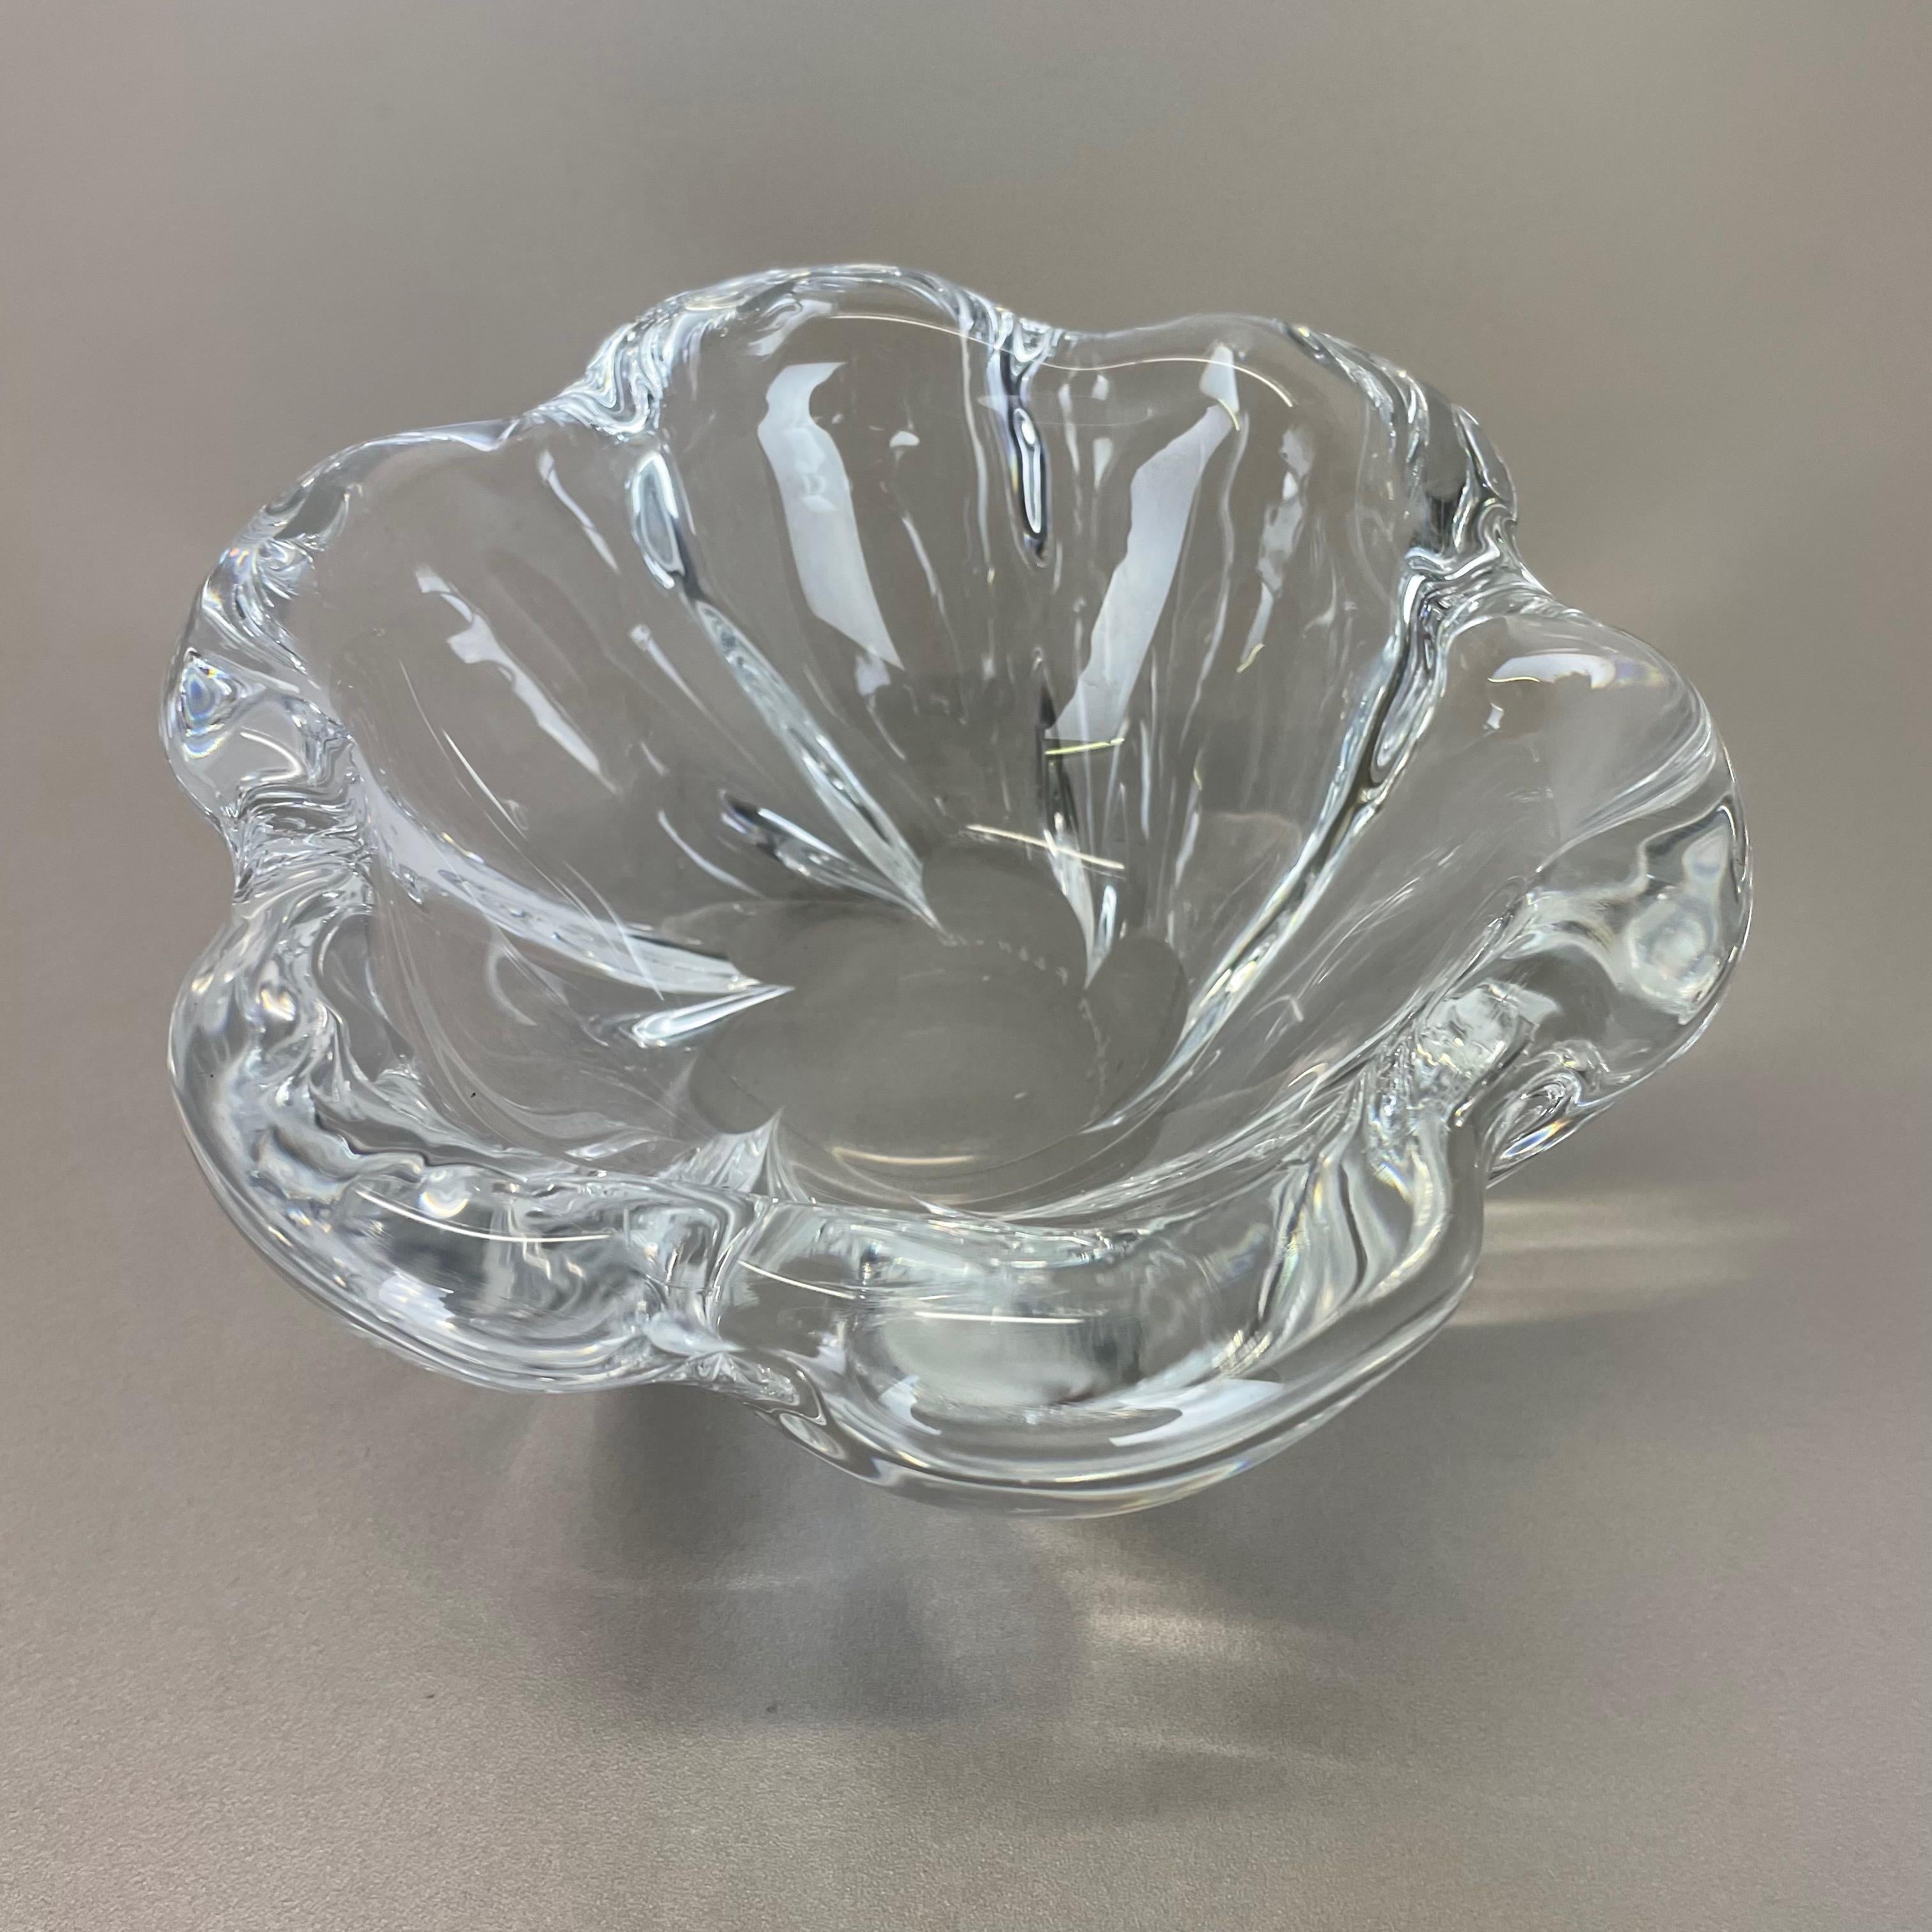 Large 2kg Floral Glass Shell Bowl Ashtray Element by Orrefors, Sweden, 1970s In Good Condition For Sale In Kirchlengern, DE